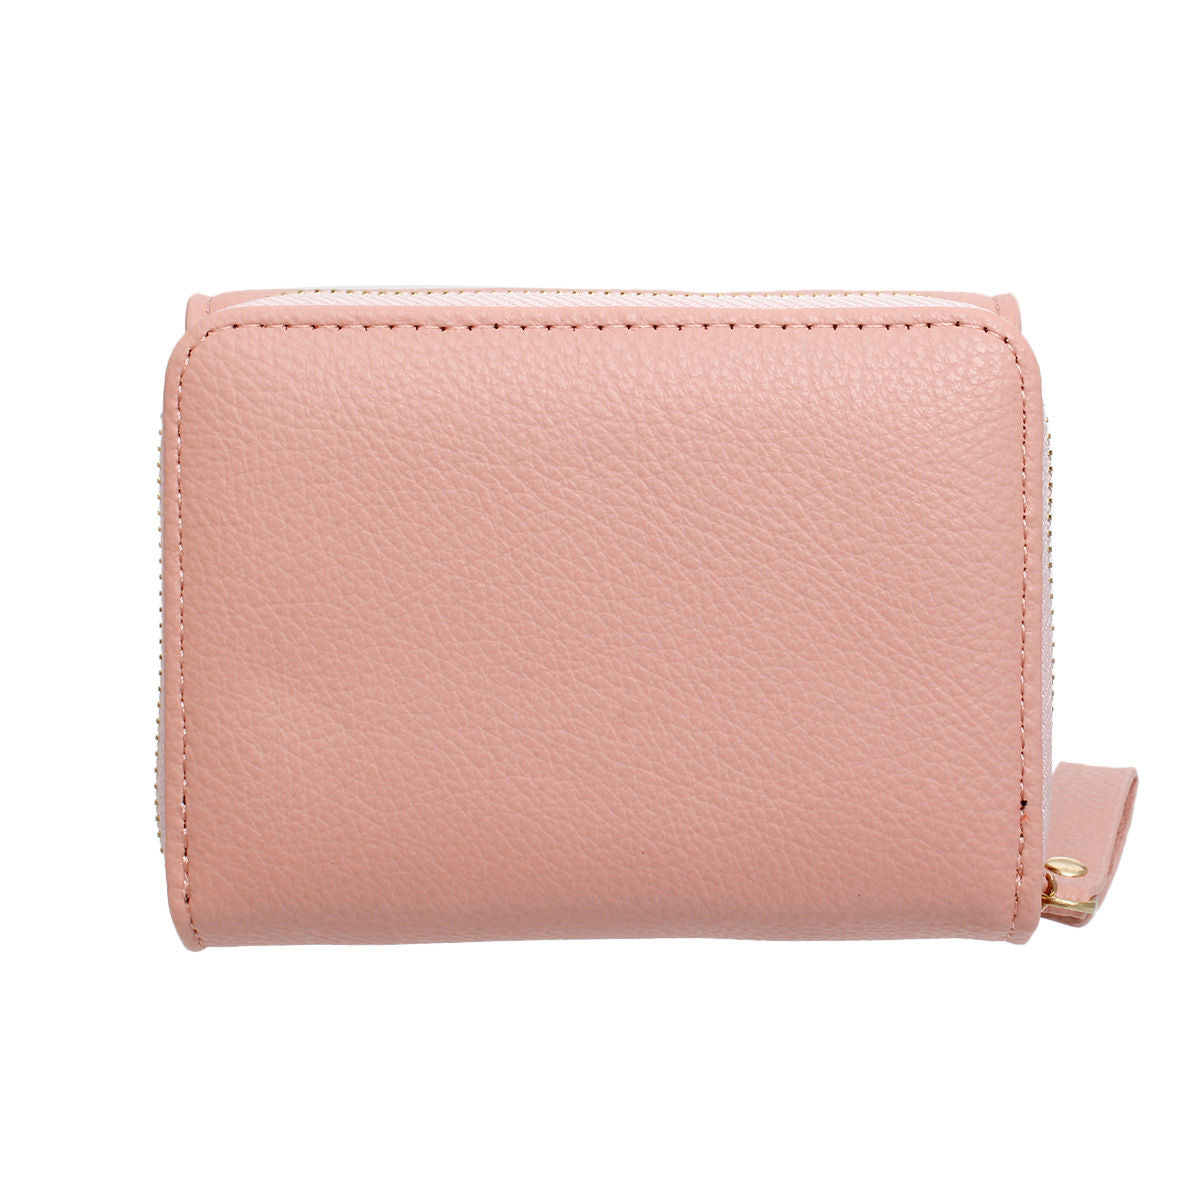 Accordian Wallet Pink Snap Cardholder for Women